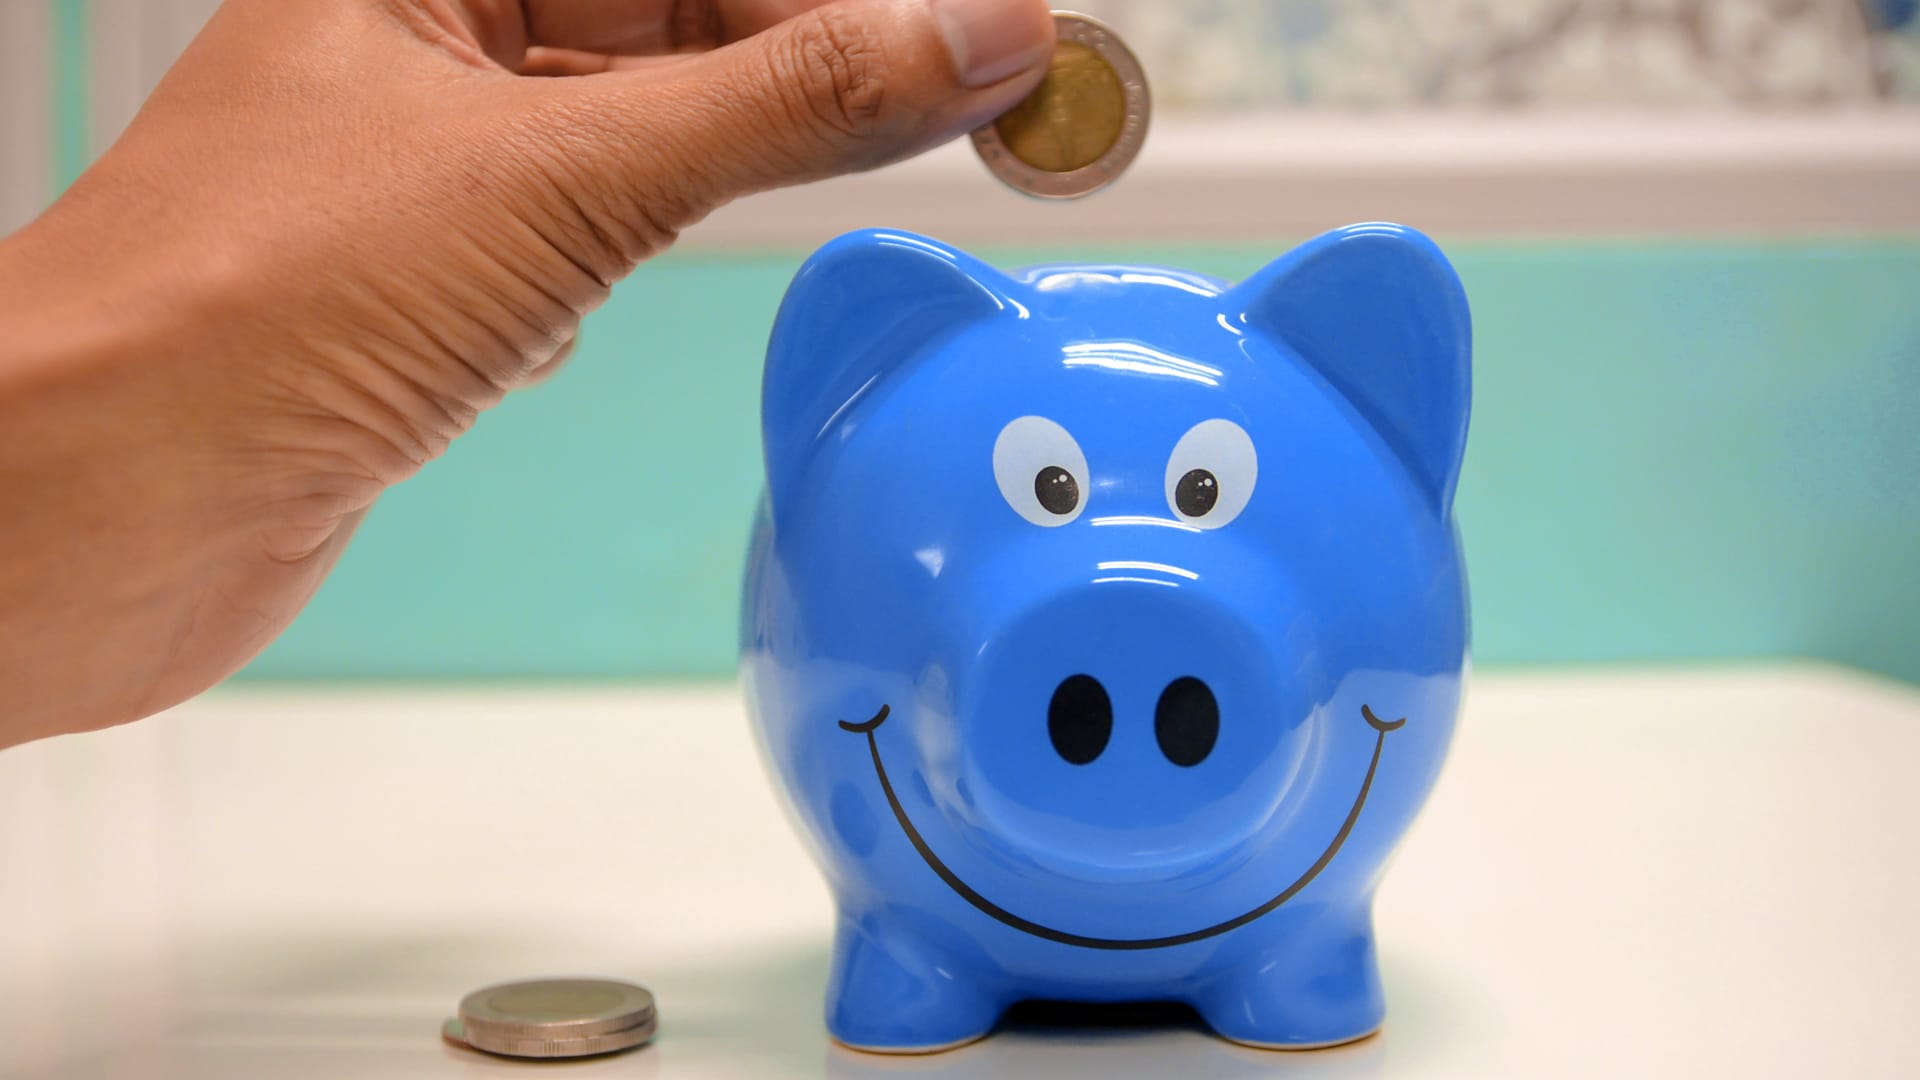 Coins being places in a blue piggy bank